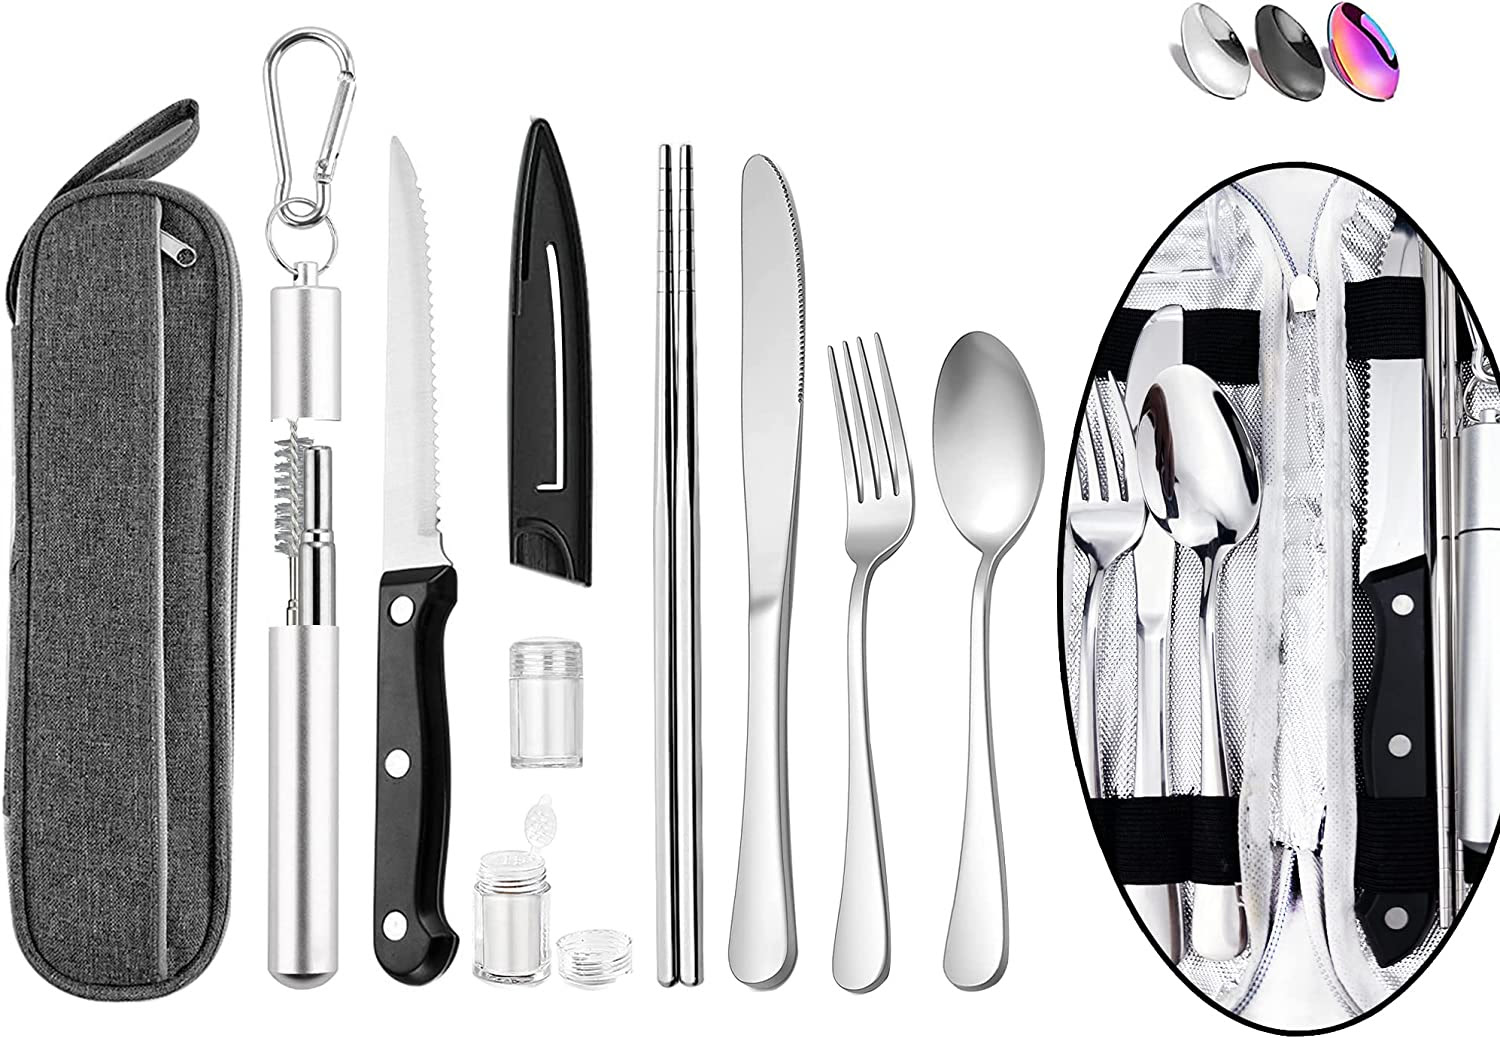 Image of Reusable Travel Utensils ,Travel Camping Cutlery Set